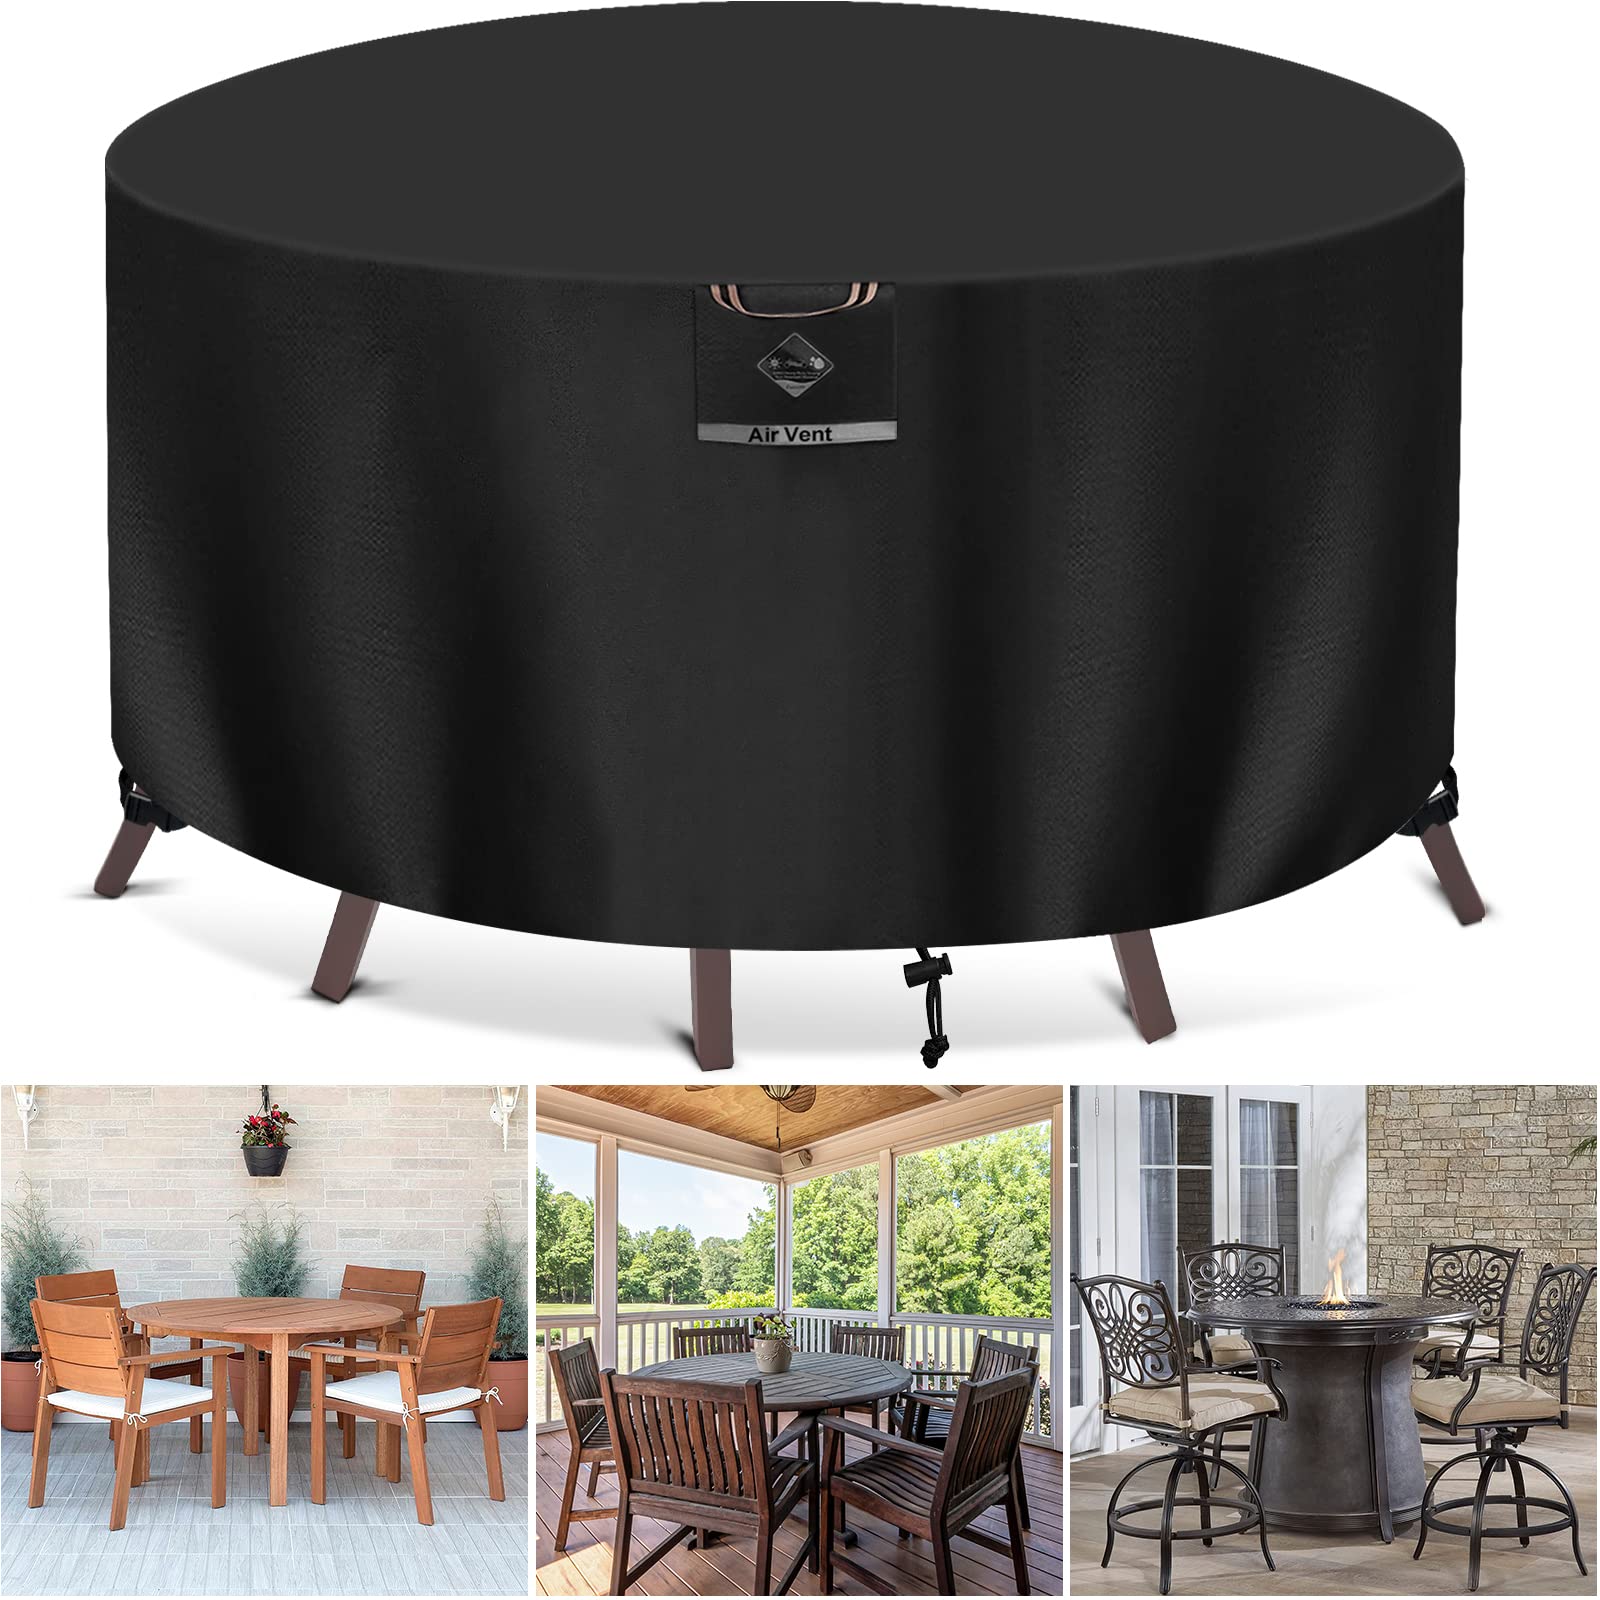 Paswith Outdoor Patio Furniture Covers Waterproof 600D Strong Tear Resistant Round Patio Table Cover, Patio Furniture Covers Win